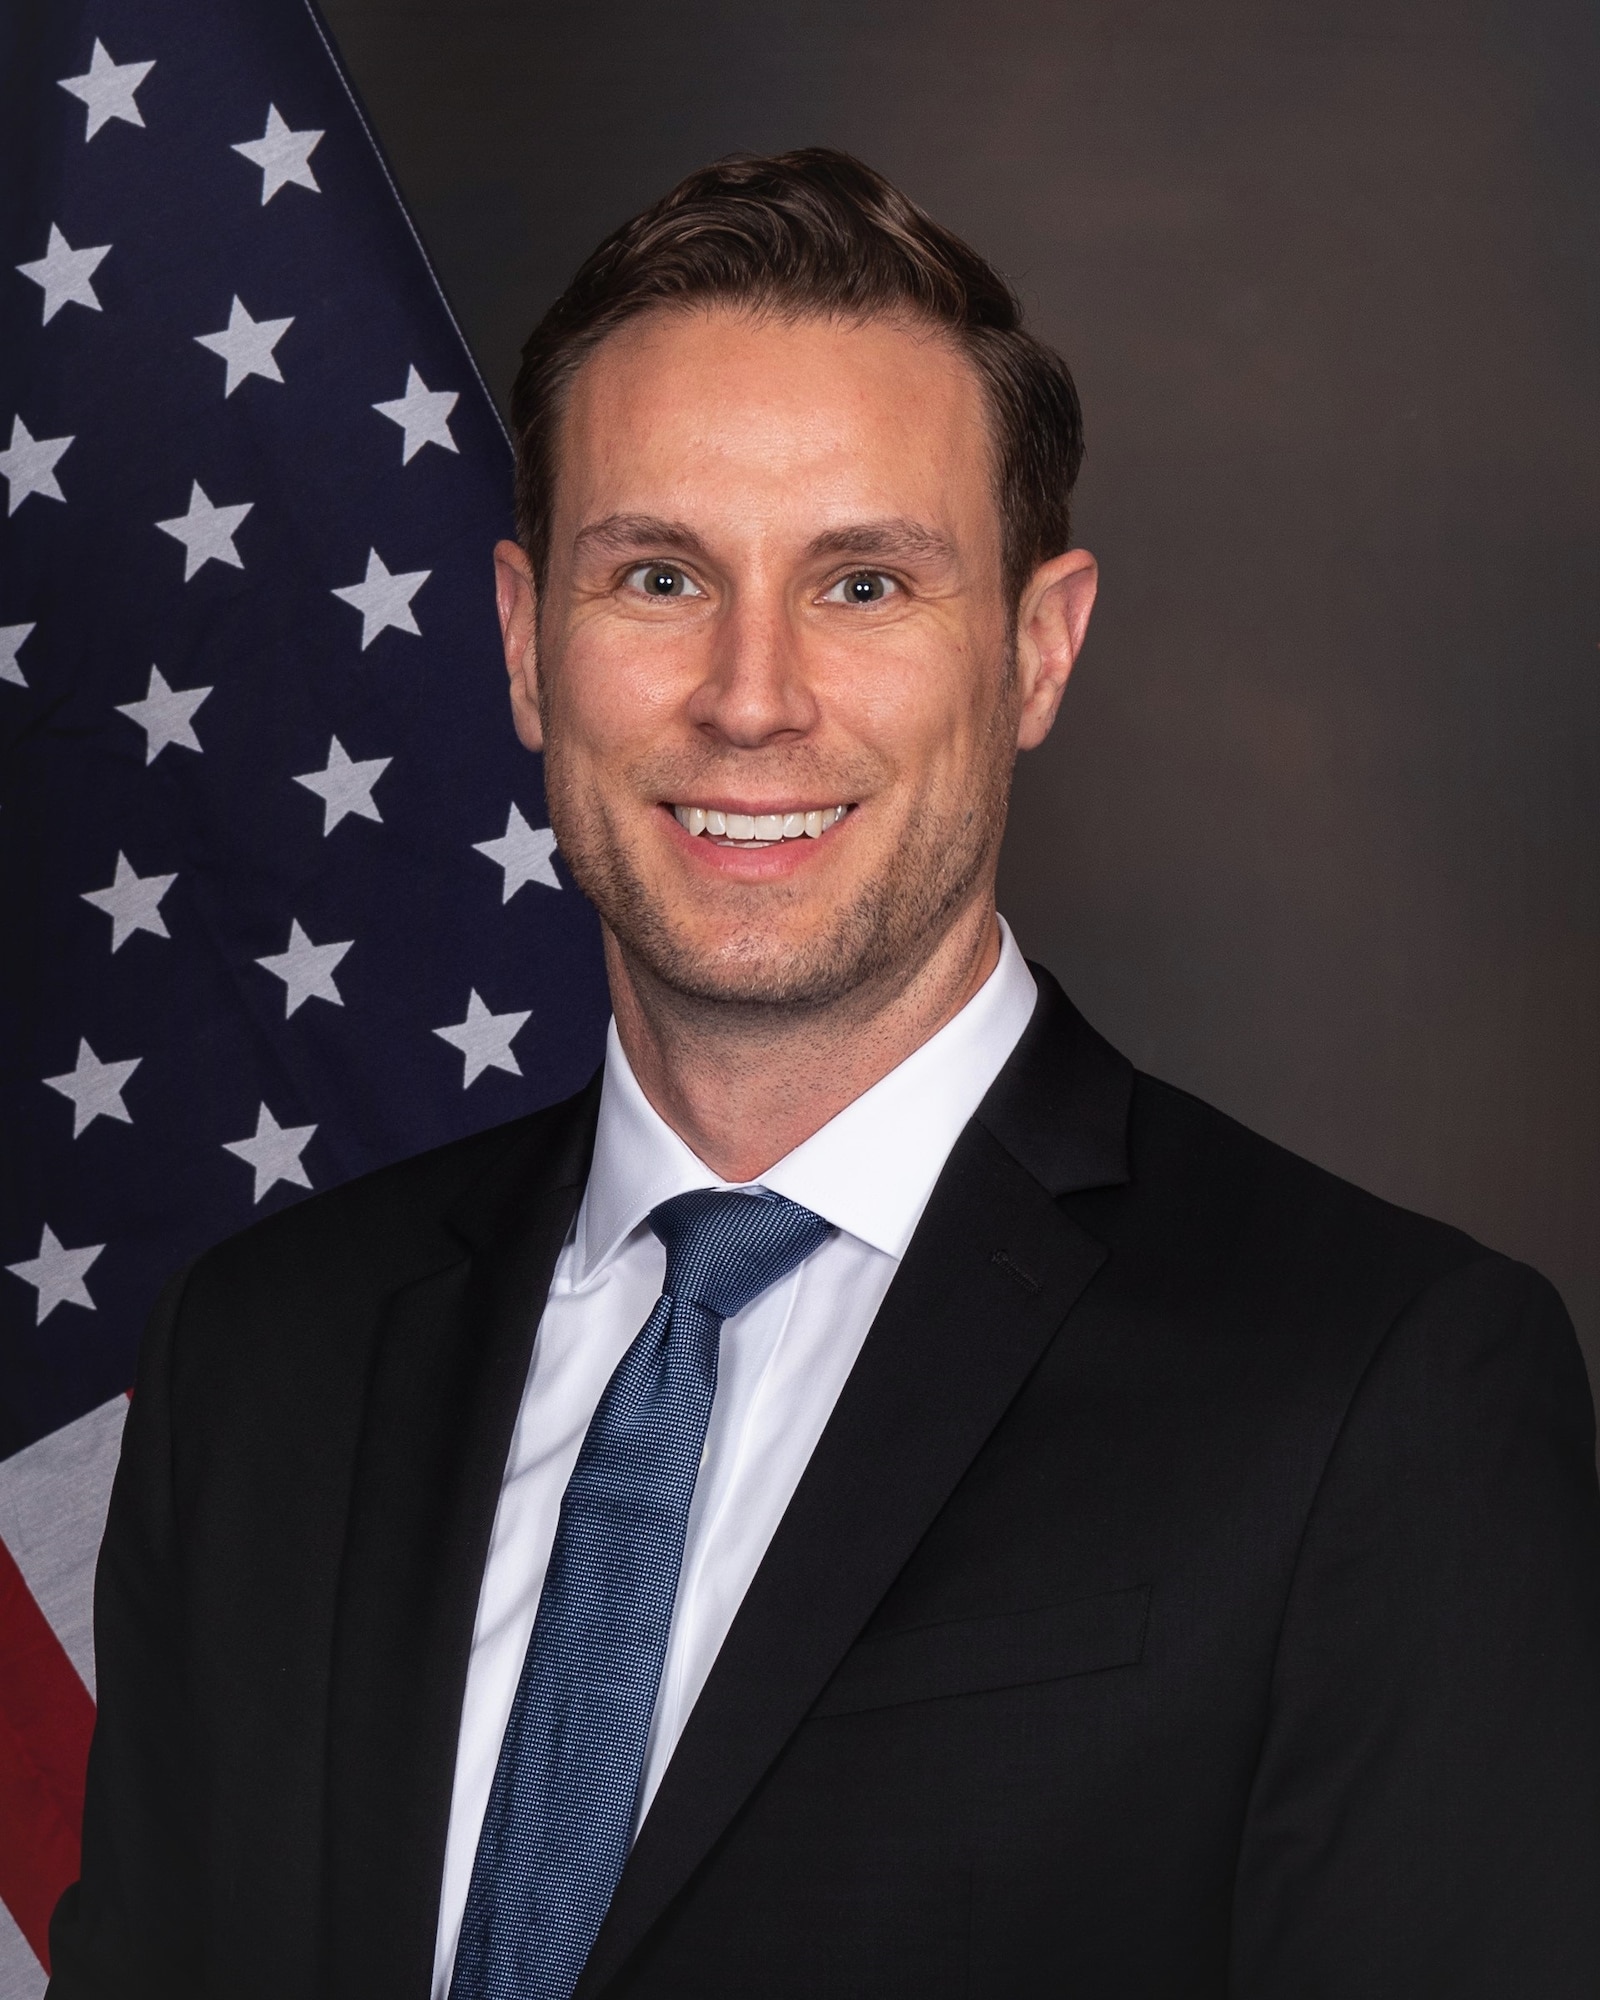 OSI is ramping up its intelligence capabilities by appointing its first full-time Intelligence Specialist Functional manager, Eric O'Leary, to lead the agency's training, development and management of intelligence specialists. (U.S. Air Force photo)